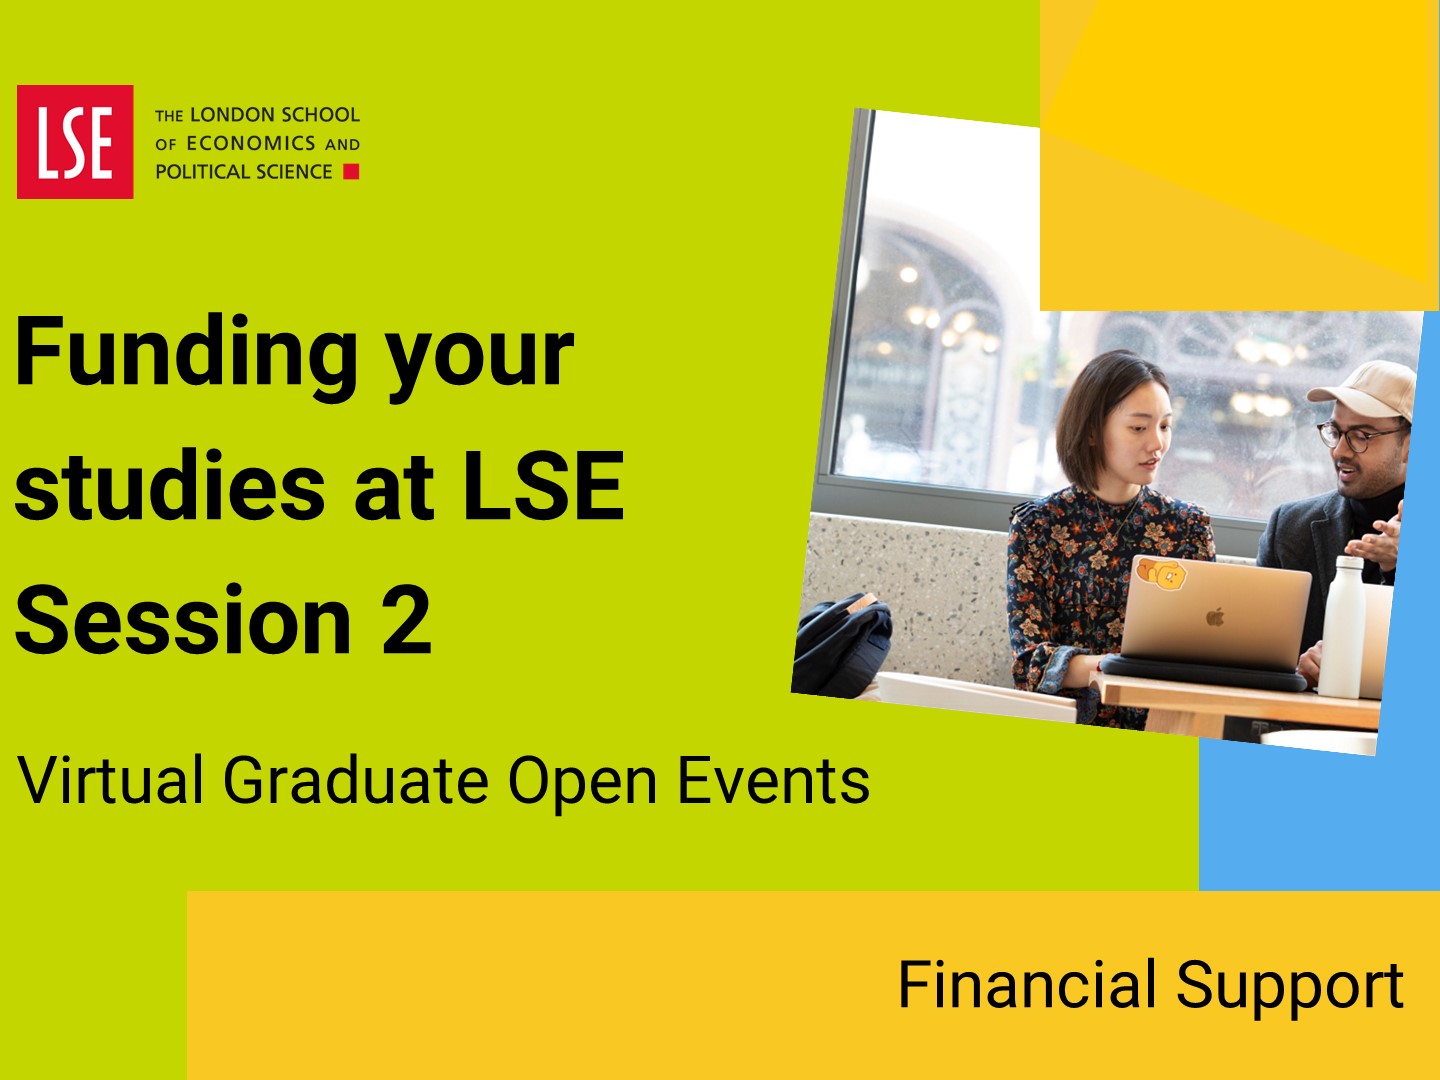 Funding your studies at LSE (session 2)